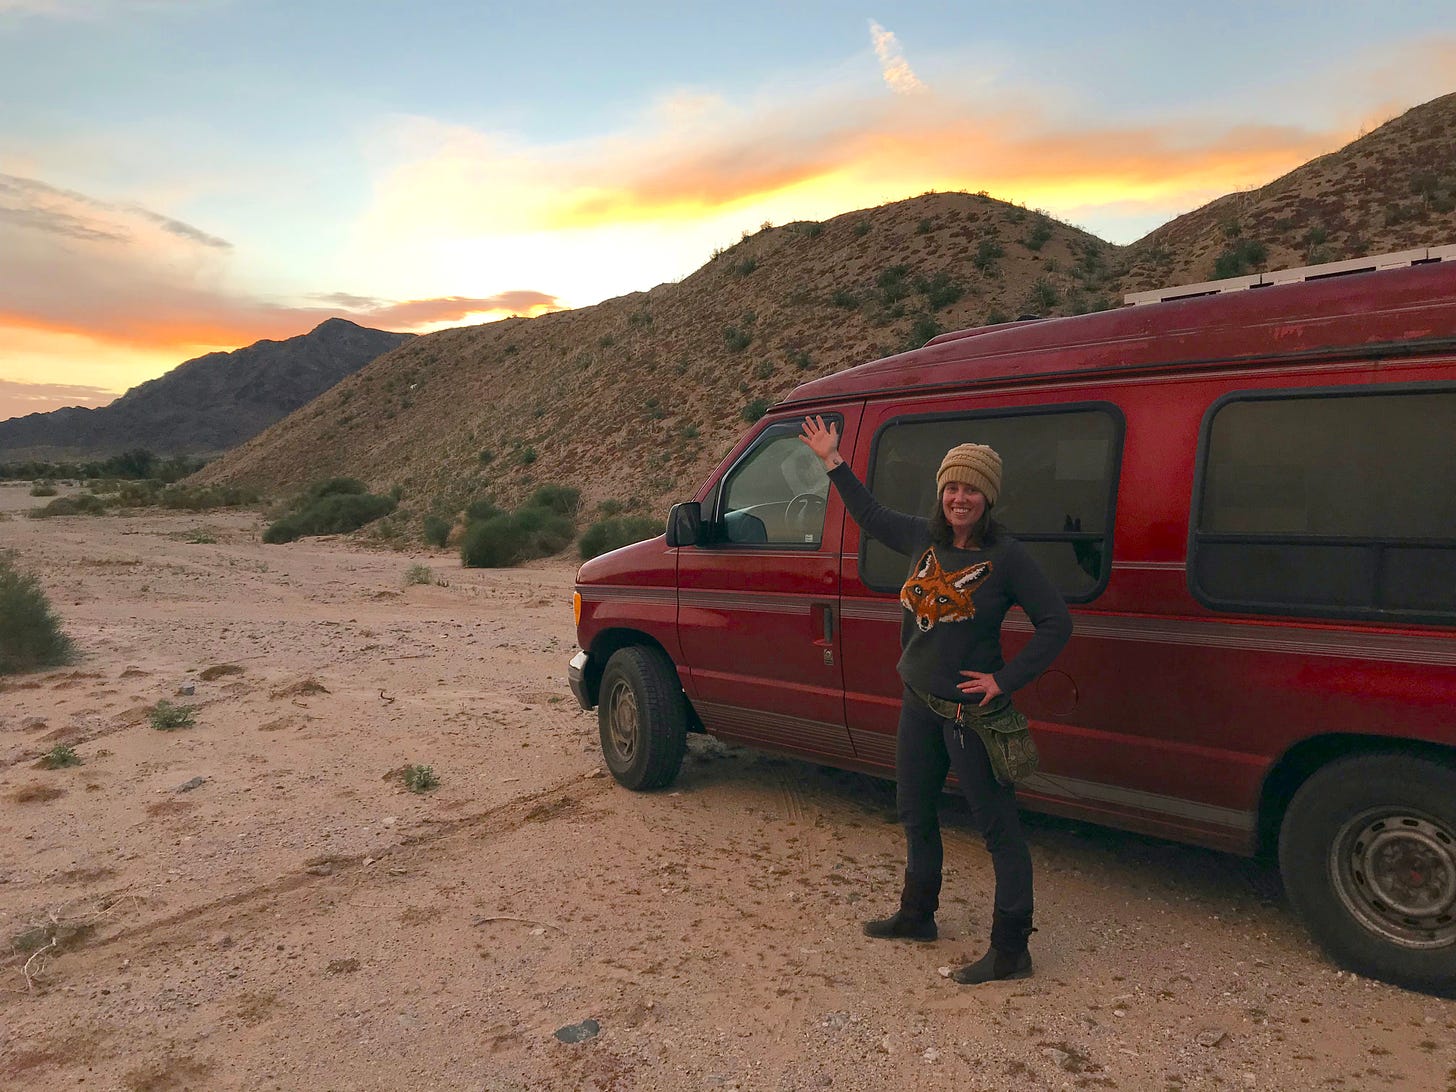 A woman (the author) stands in front of a red van pointing to the sandy hills and sunset behind her